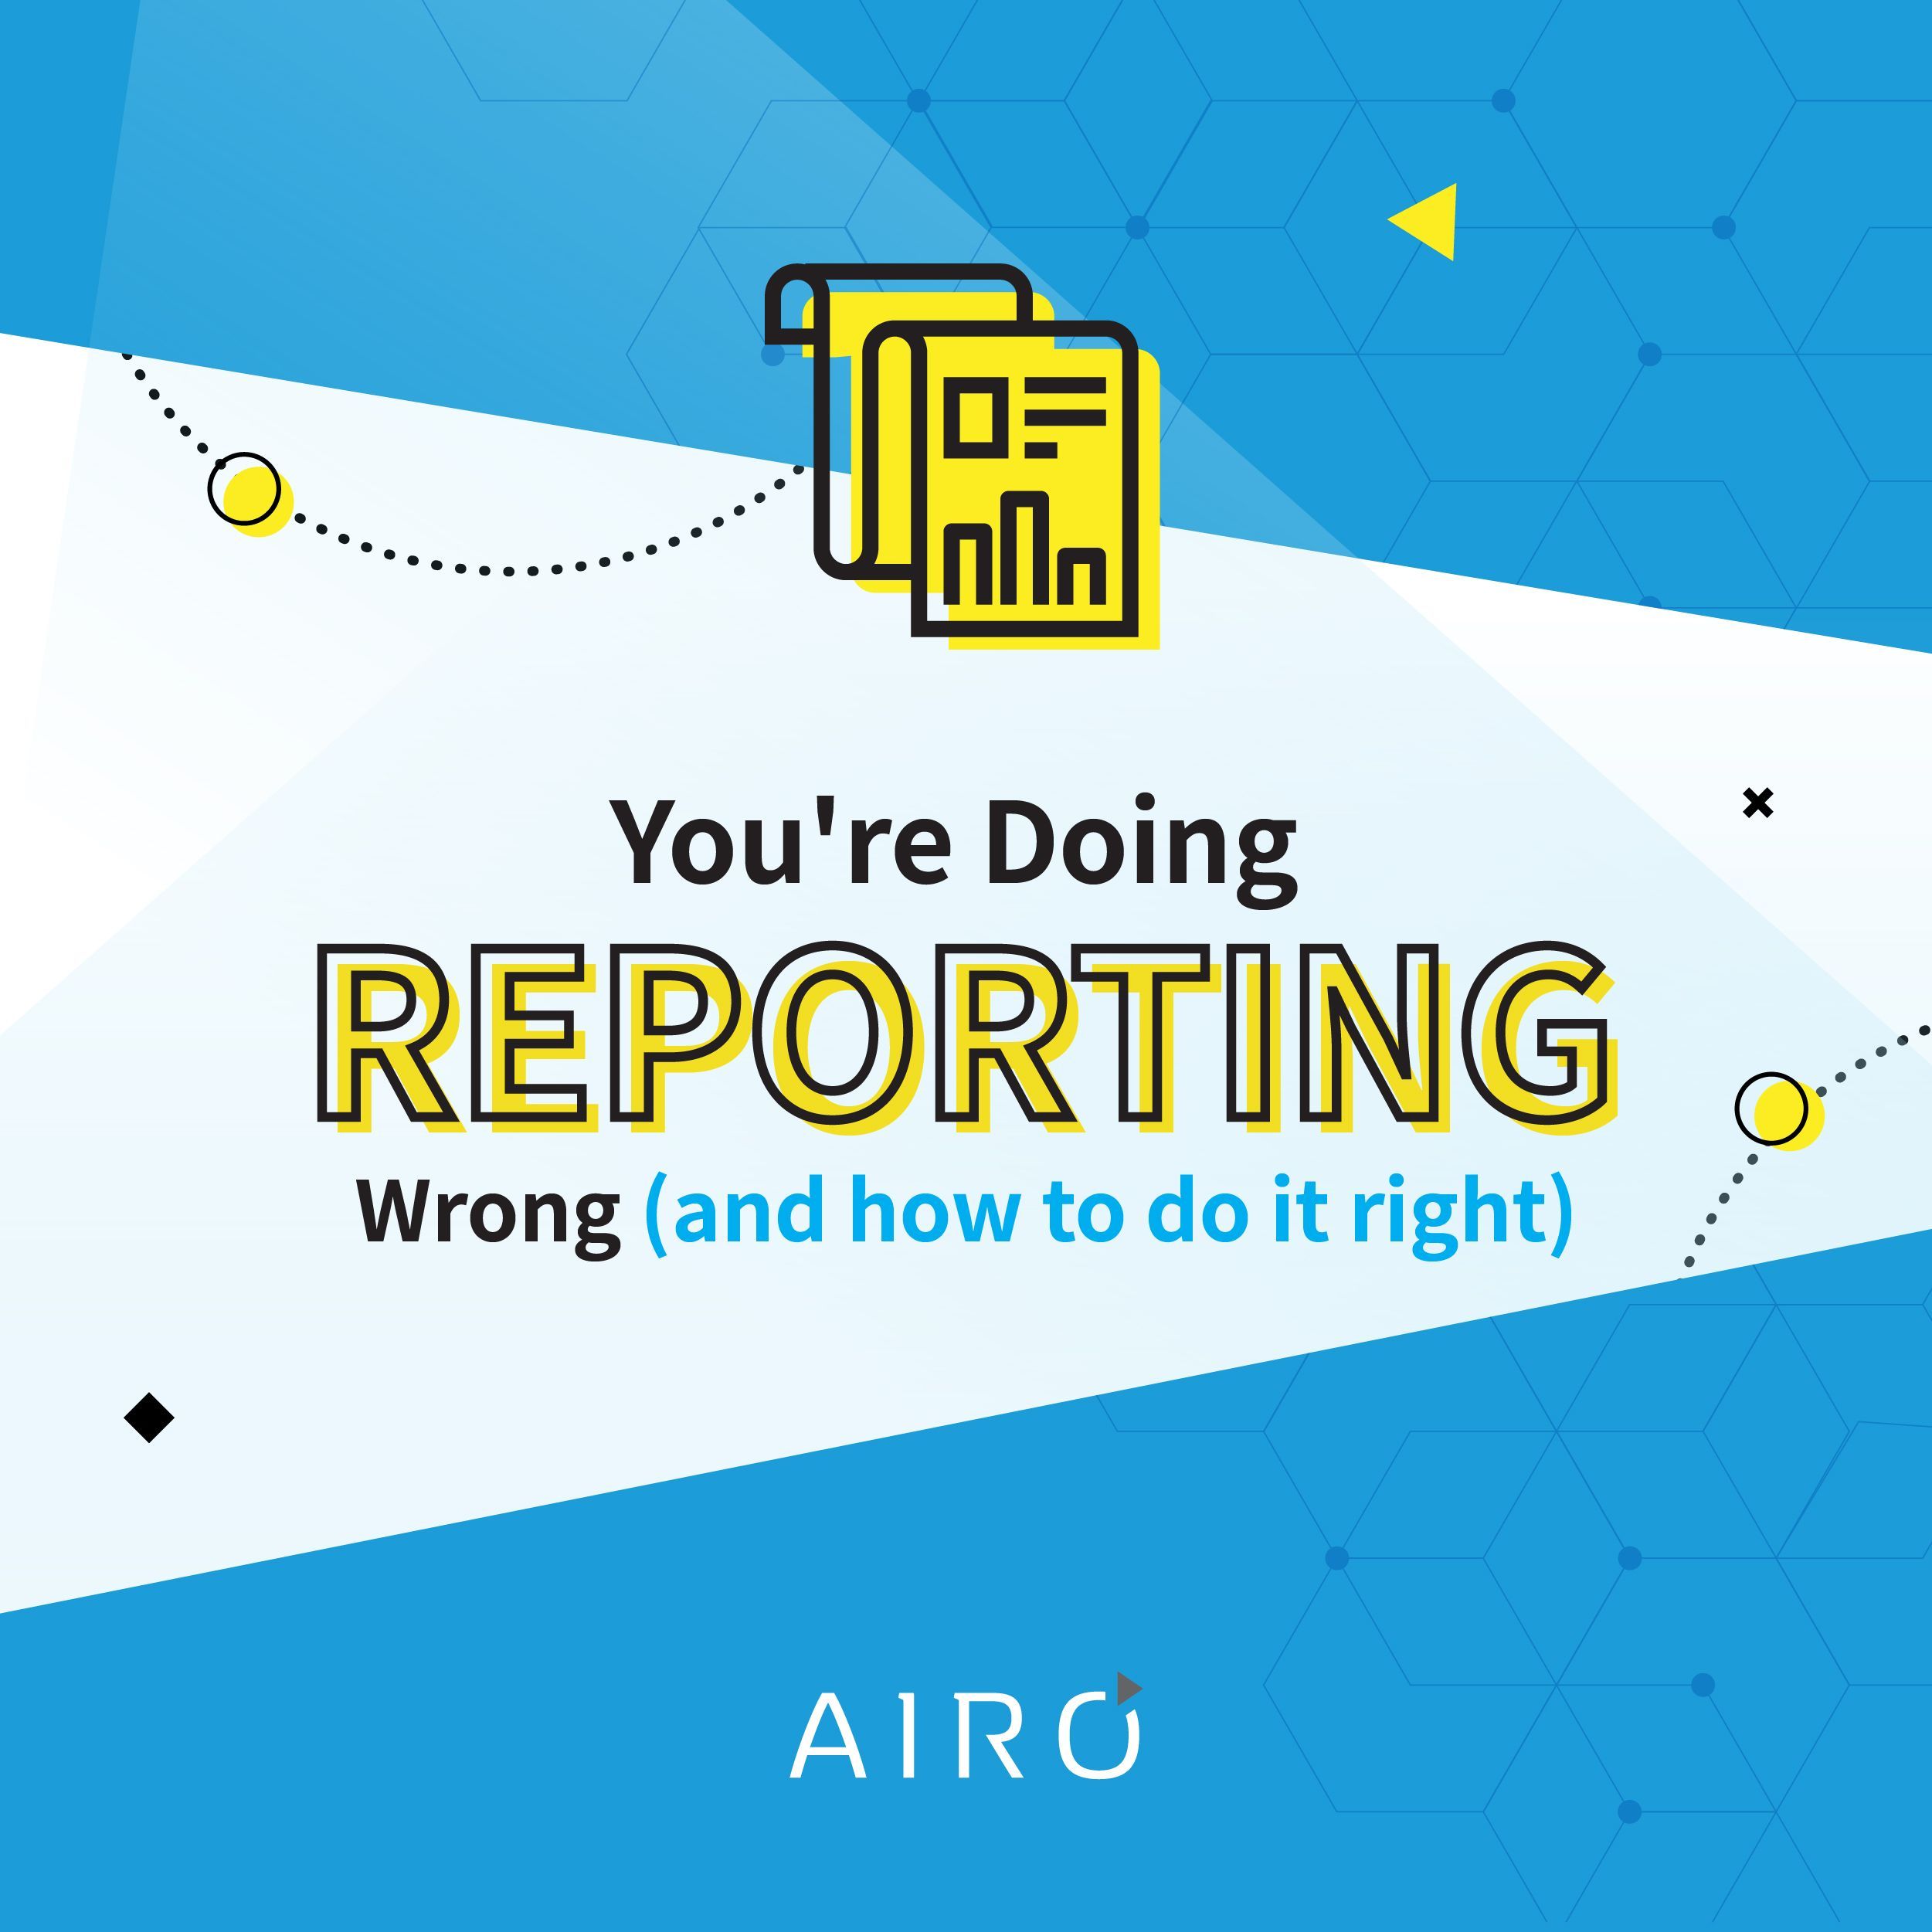 TITLE: You're doing reporting wrong (and how to do it right)